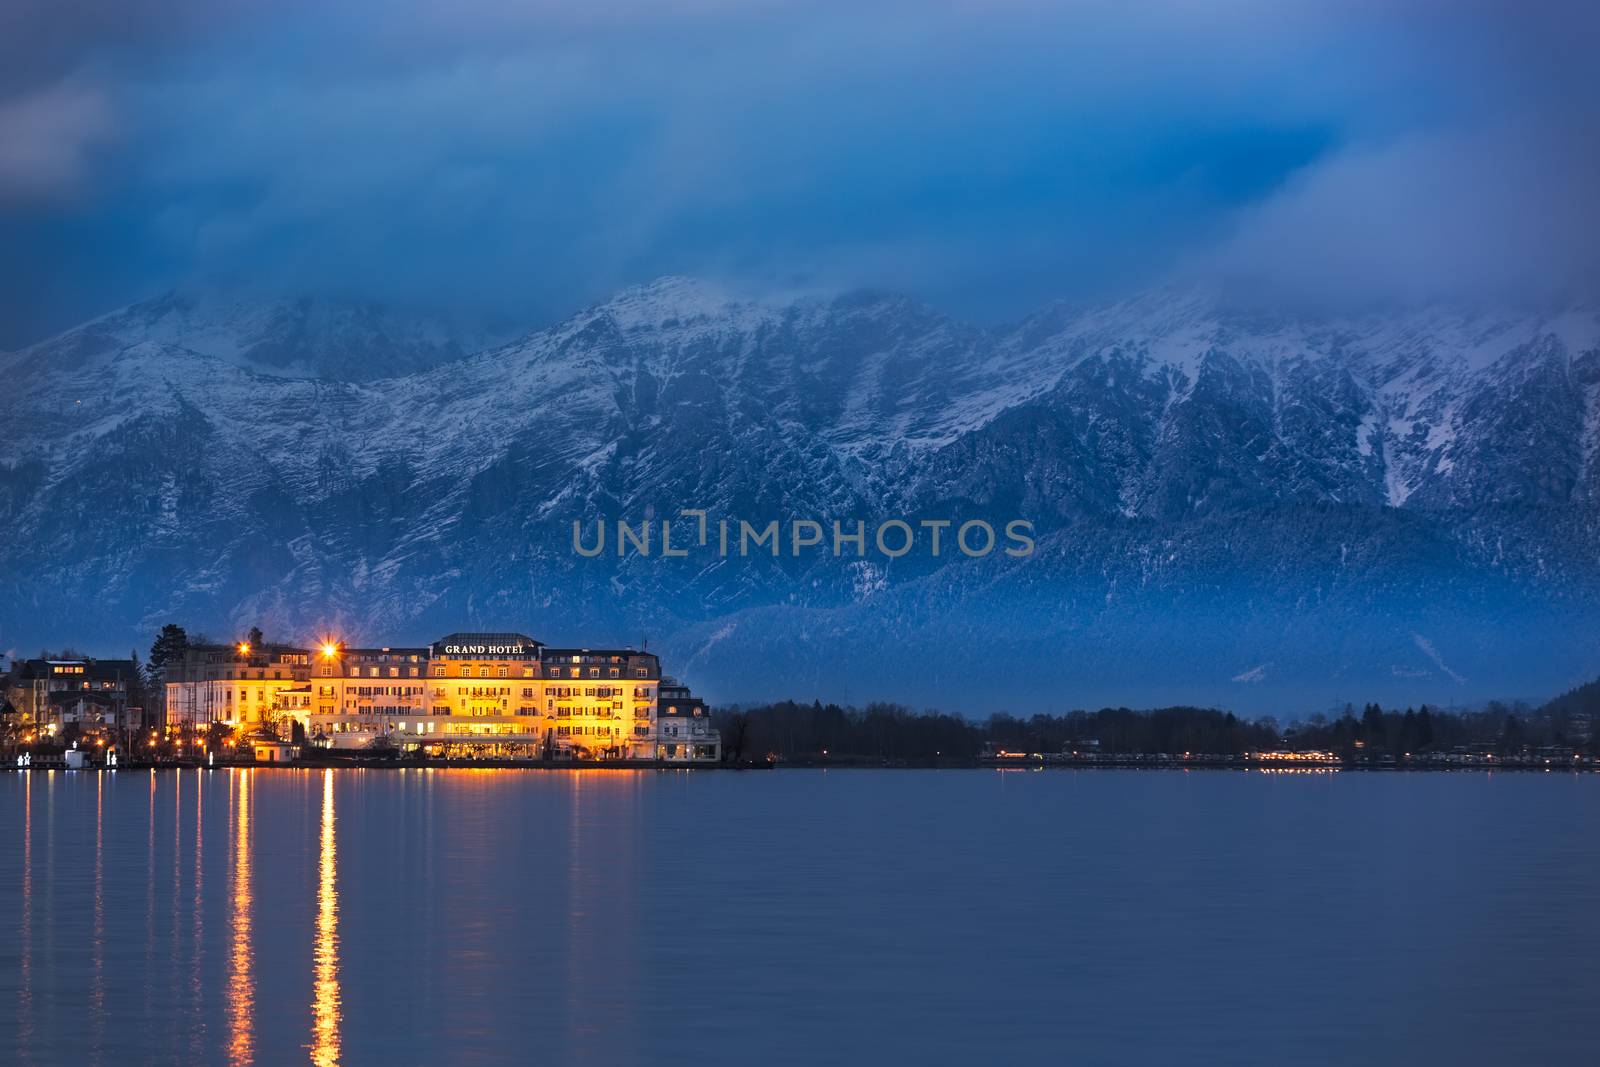 ZELL AM SEE, AUSTRIA - JANUARY 05, 2016 - Grand Hotel in front o by fisfra